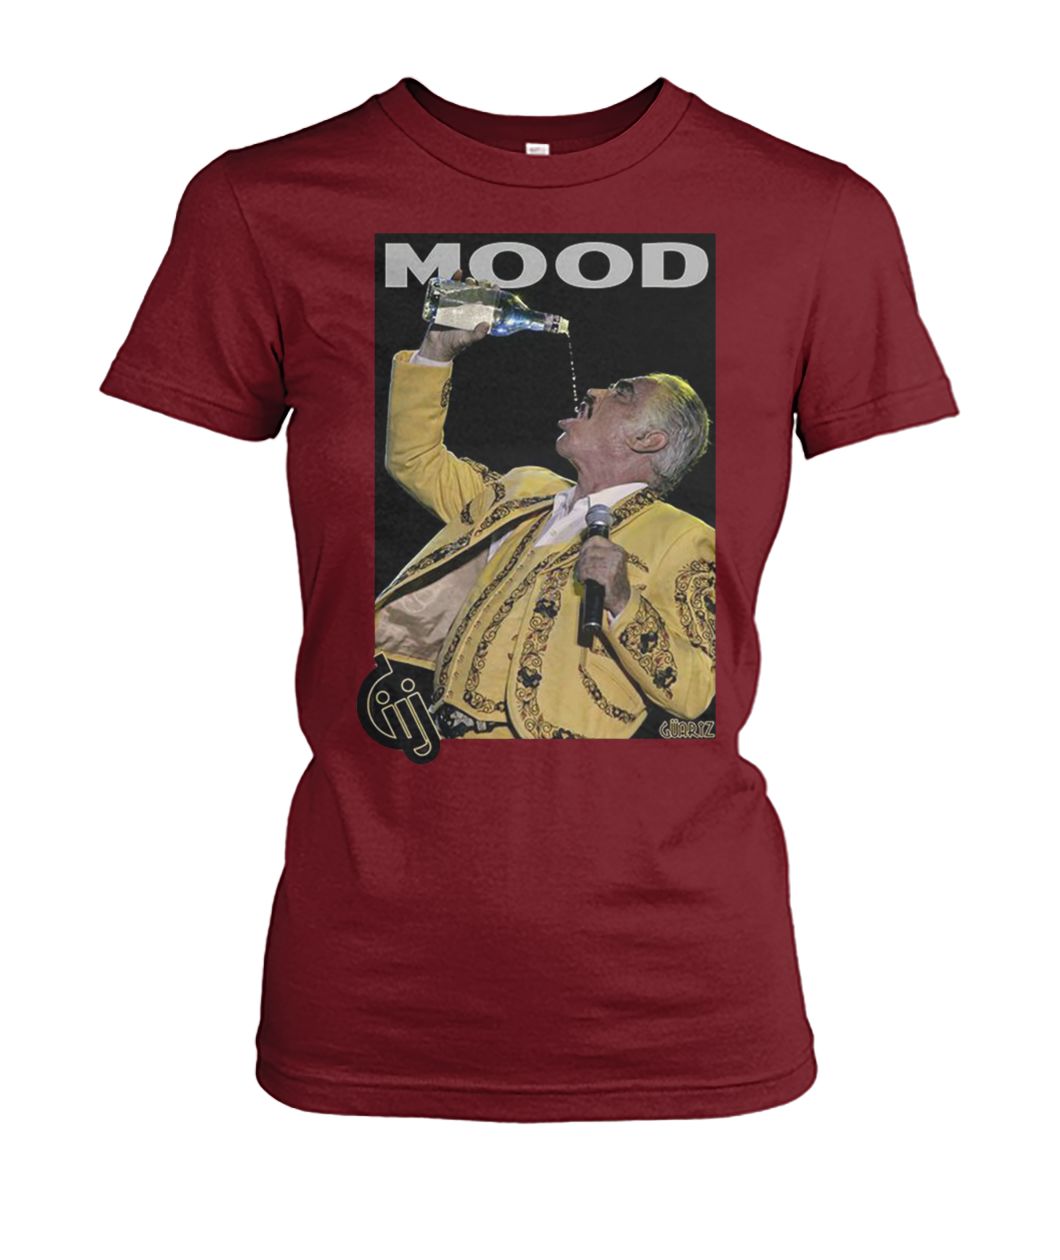 Vicente fernández drinking and singing mood women's crew tee